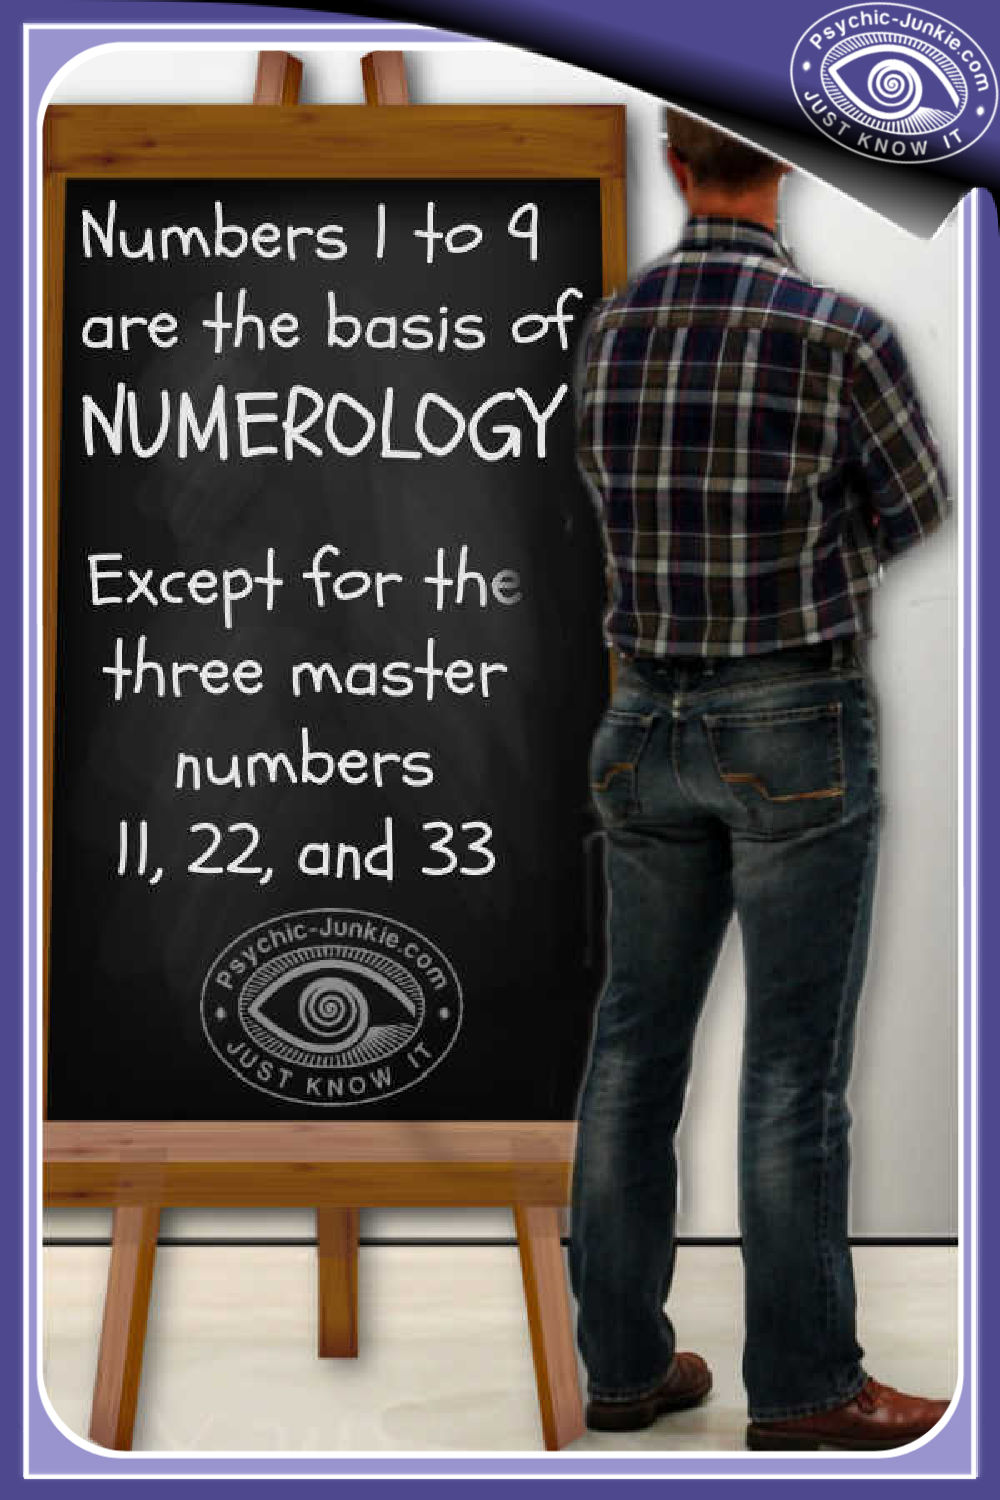 Help from the Master Numerologist John Scarano